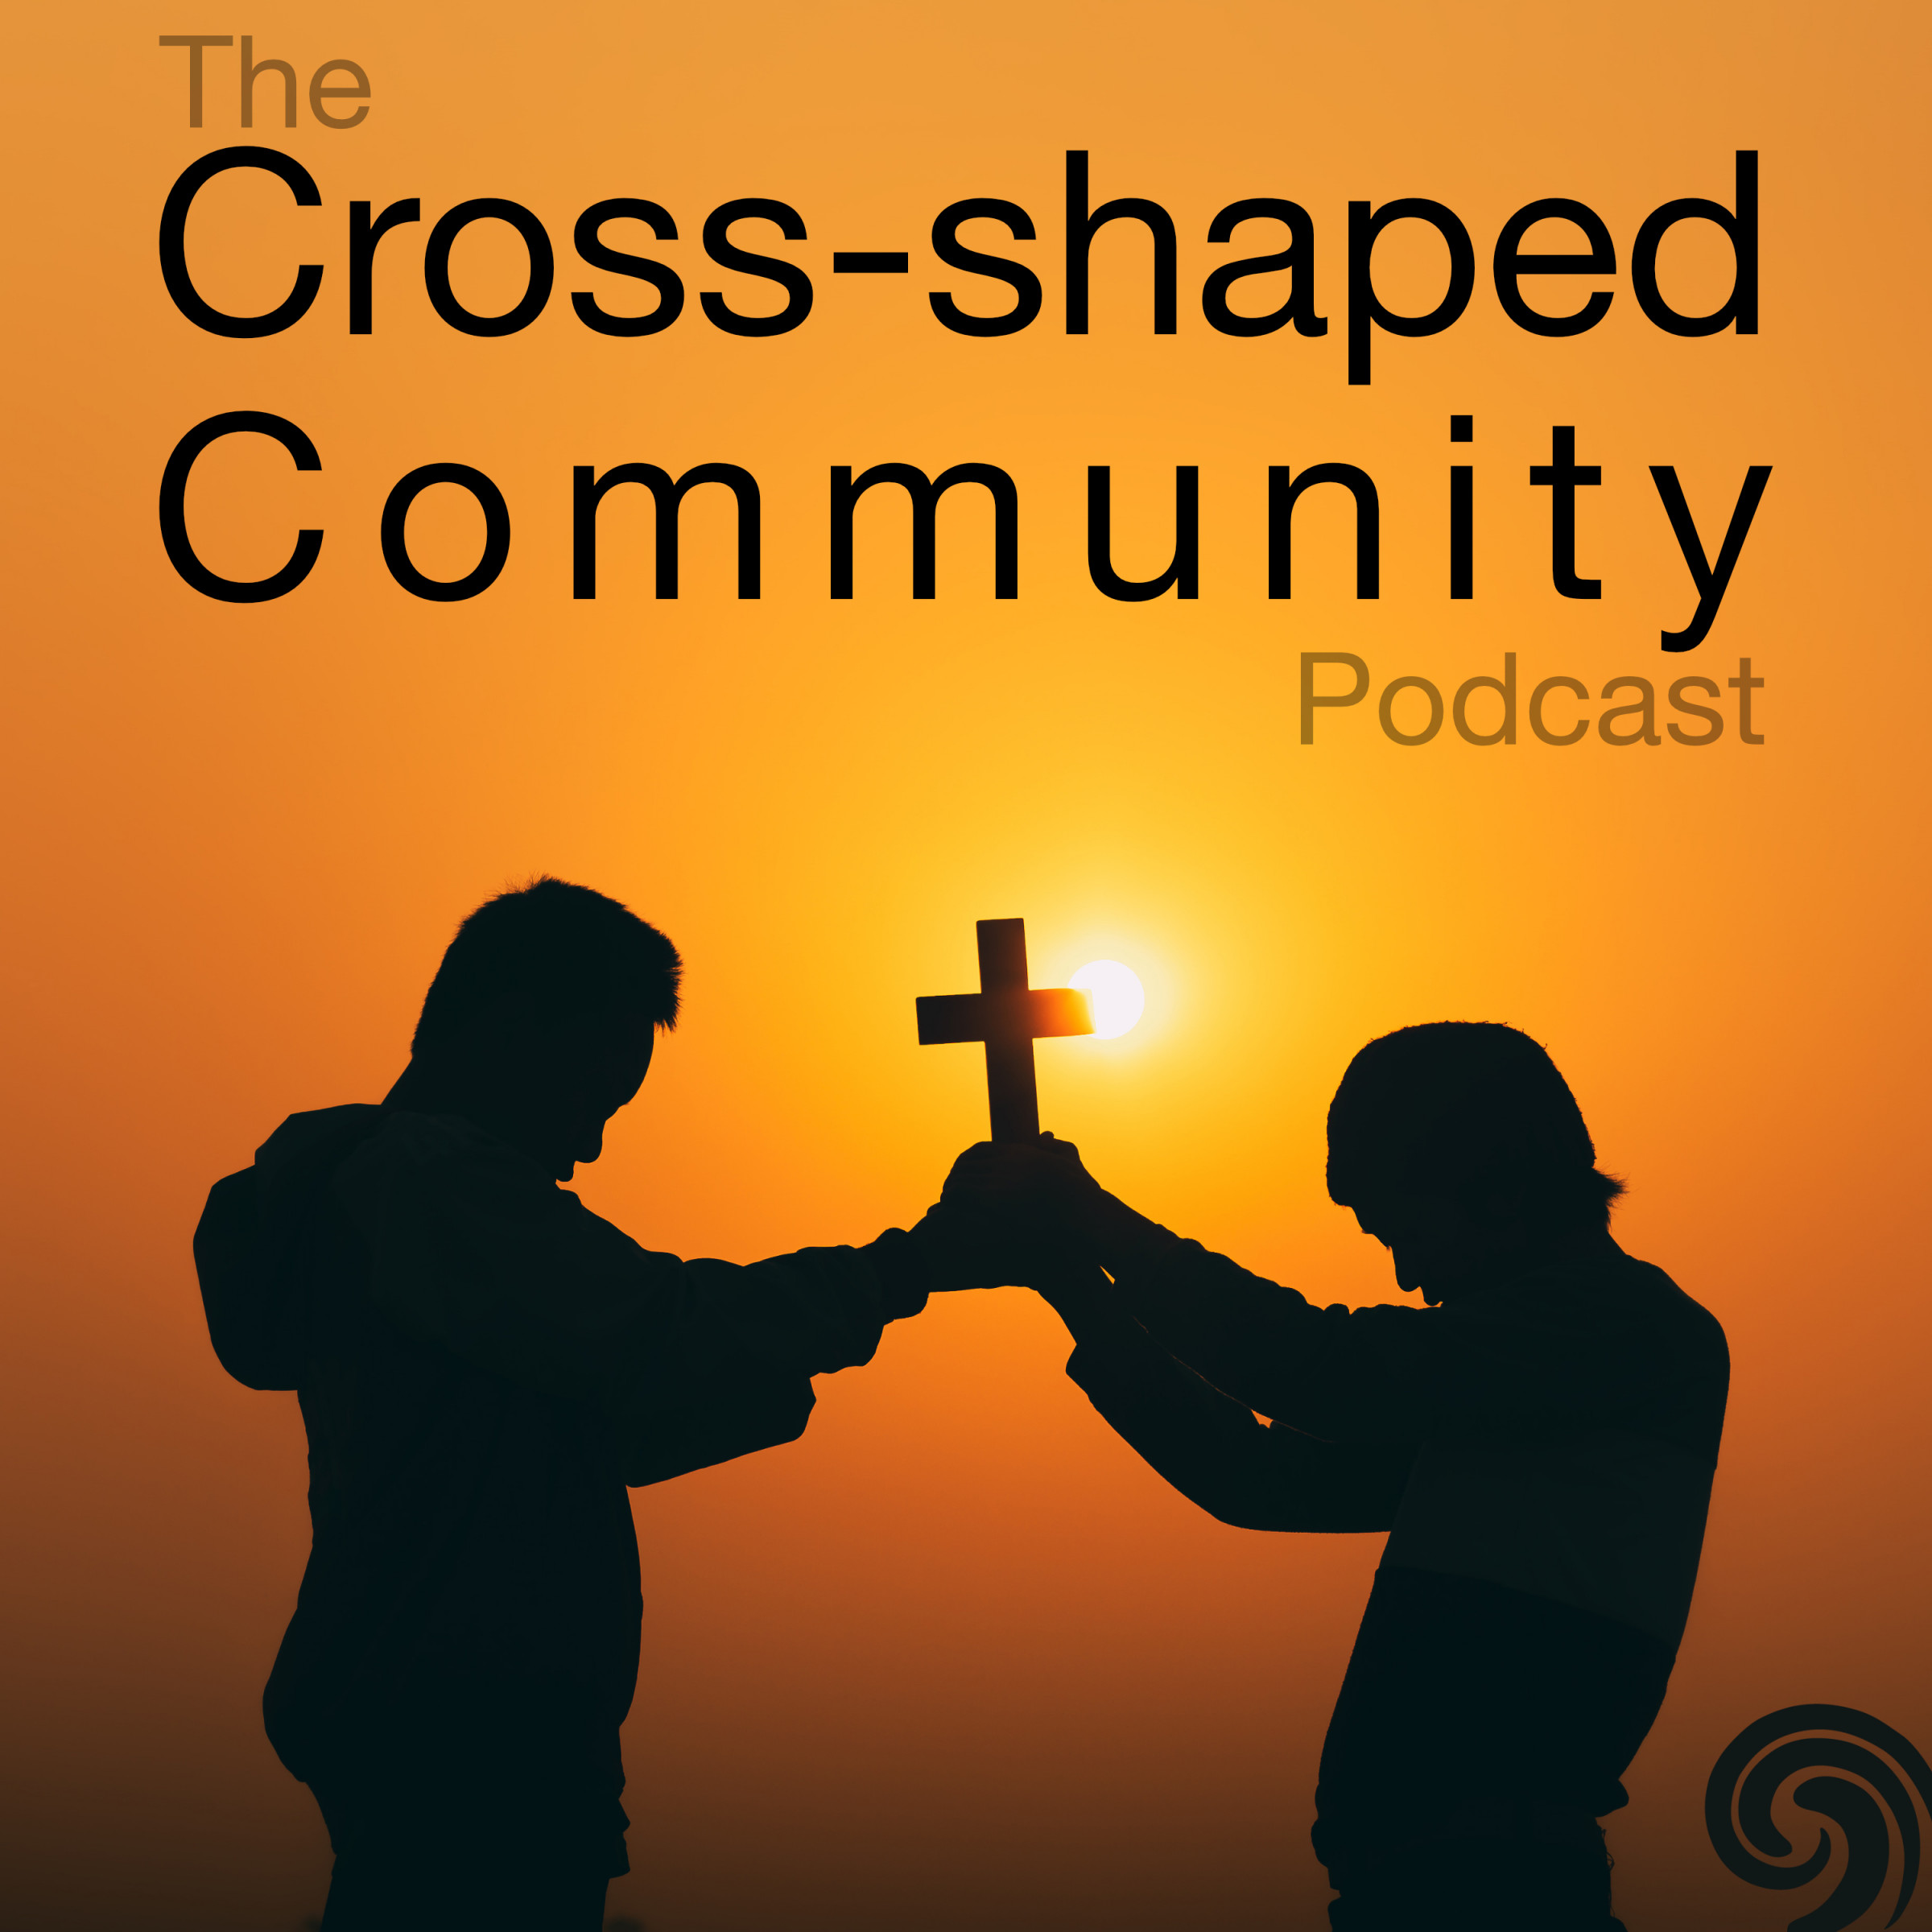 The Cross-shaped Community Podcast Image